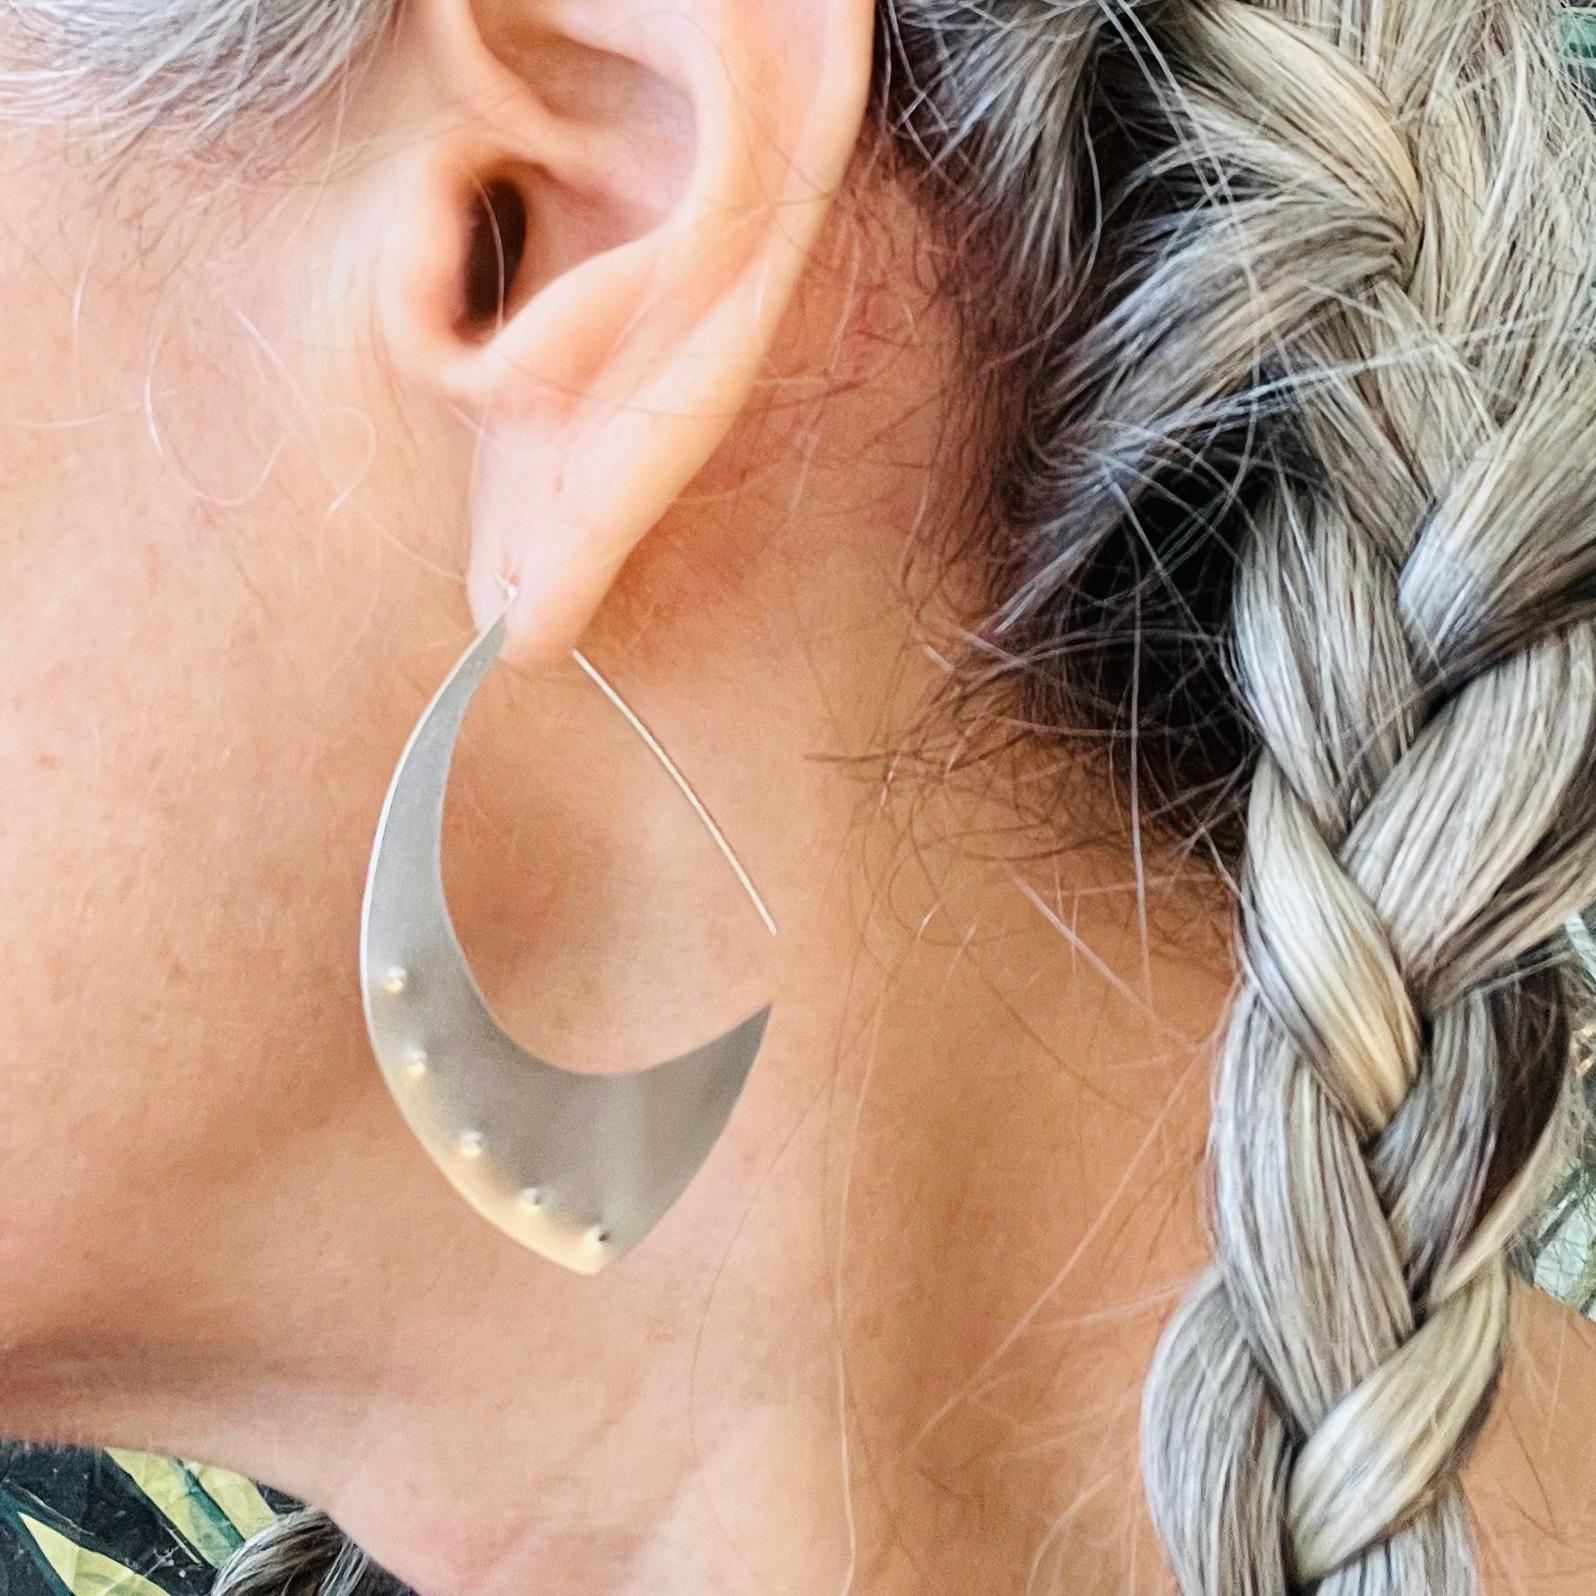 Hand fabricated jewelry means that the designer and maker Susan Crow actually made these earrings using sheet, wire and very specialized metal smithing tools to form the Aubergine Sterling Silver Hoop Earrings. They are the perfect size for everyday